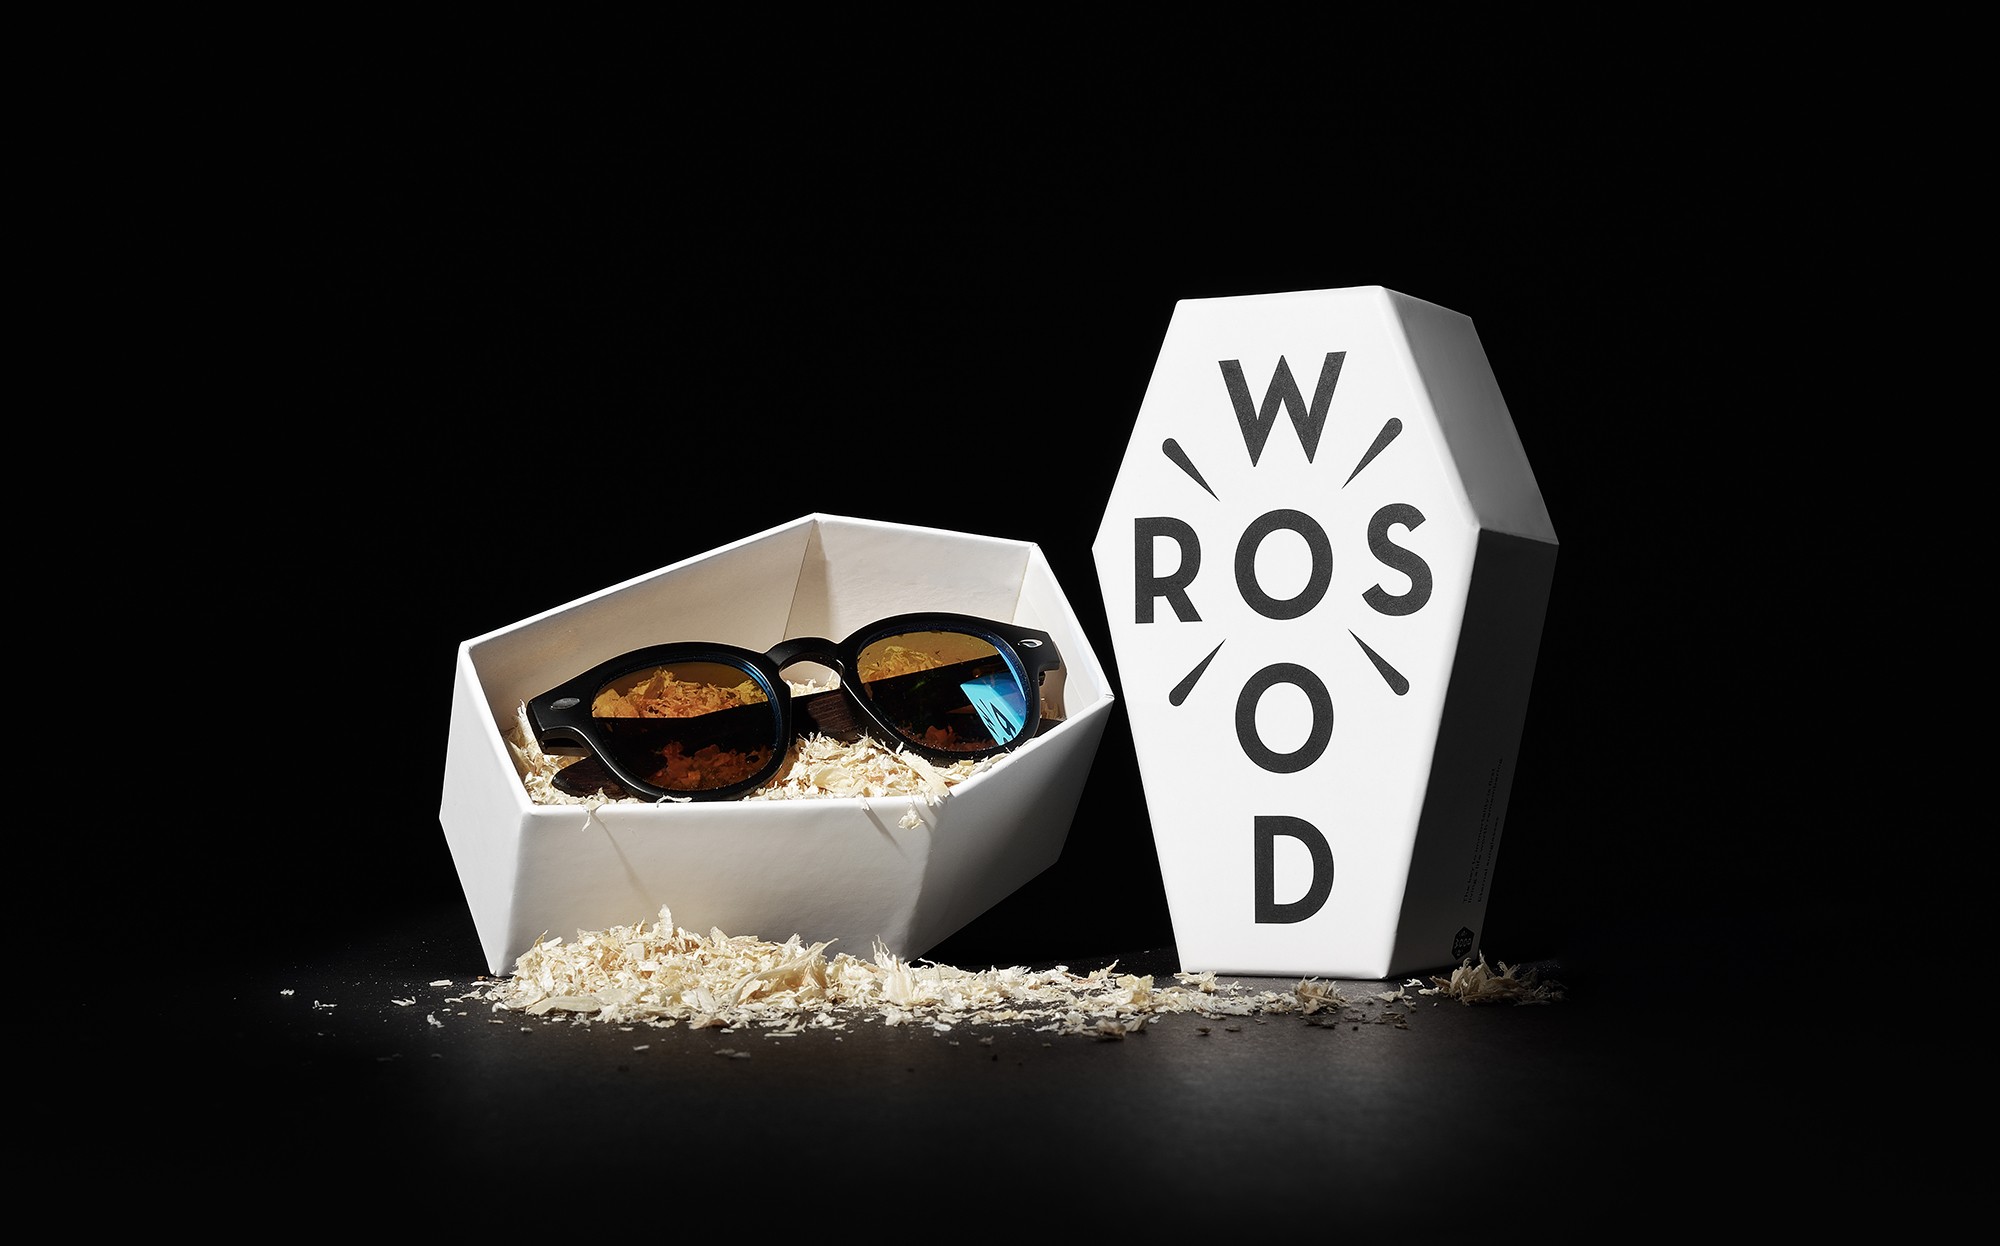 Creative Identity, Packaging Design and Storytelling for Spanish Wooden Sunglasses Brand